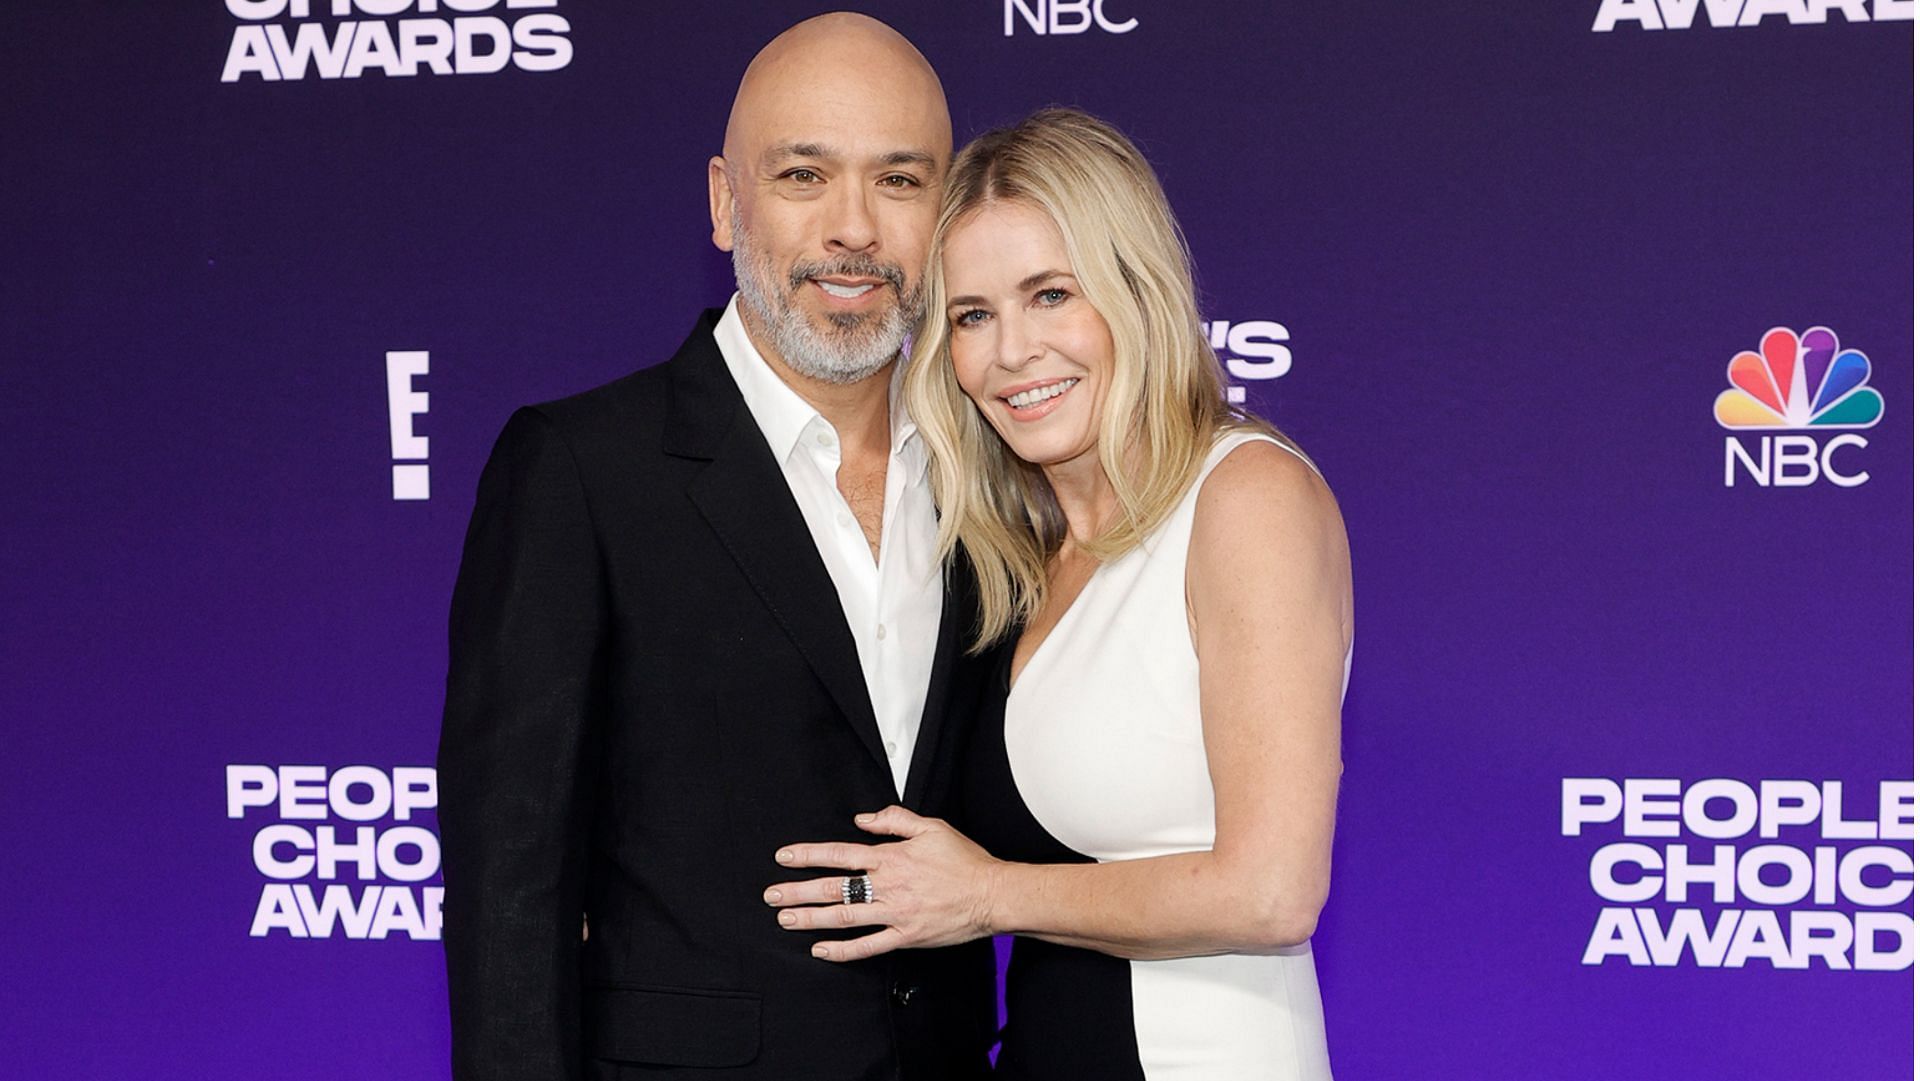 Chelsea Handler made her relationship with Jo Koy Instagram official in September 2021. (Image via Amy Sussman/Getty)